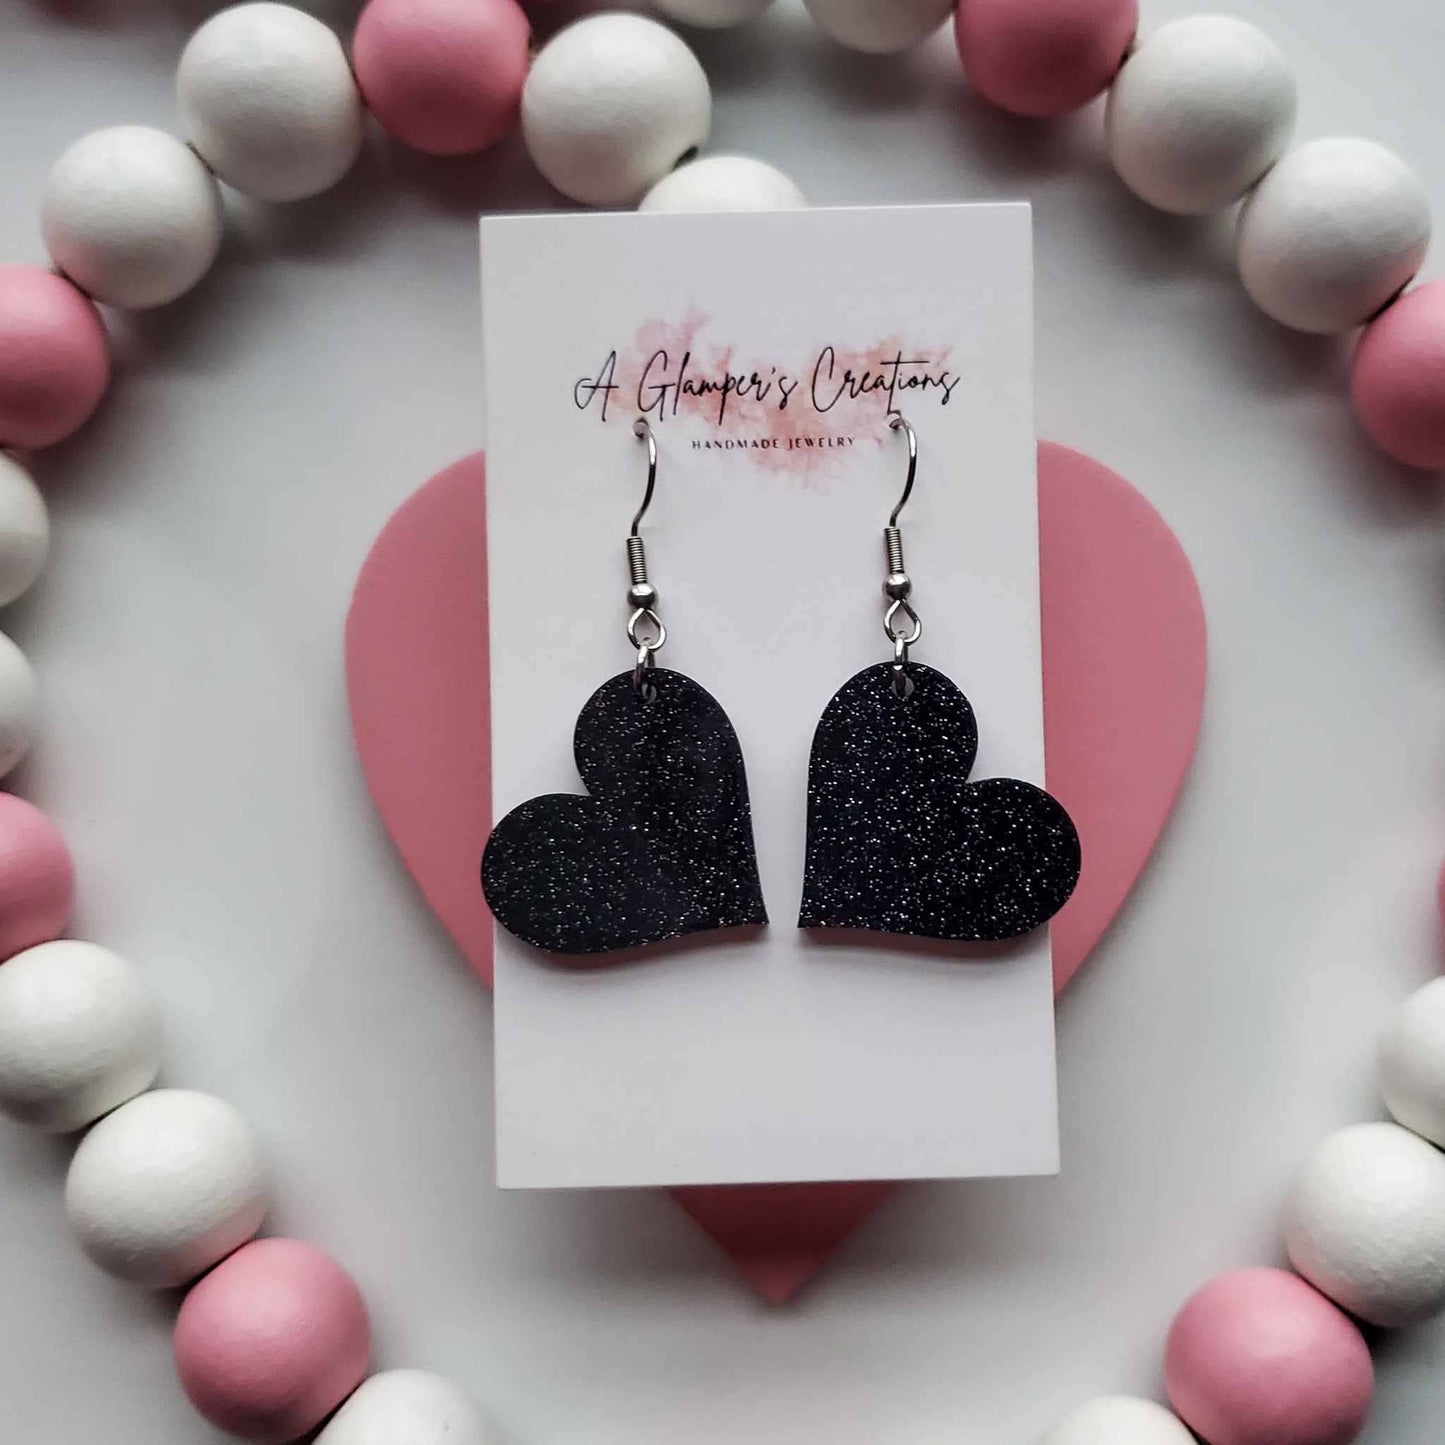 Black glitter heart earrings.  Background is white and has white and dusty pink beads.